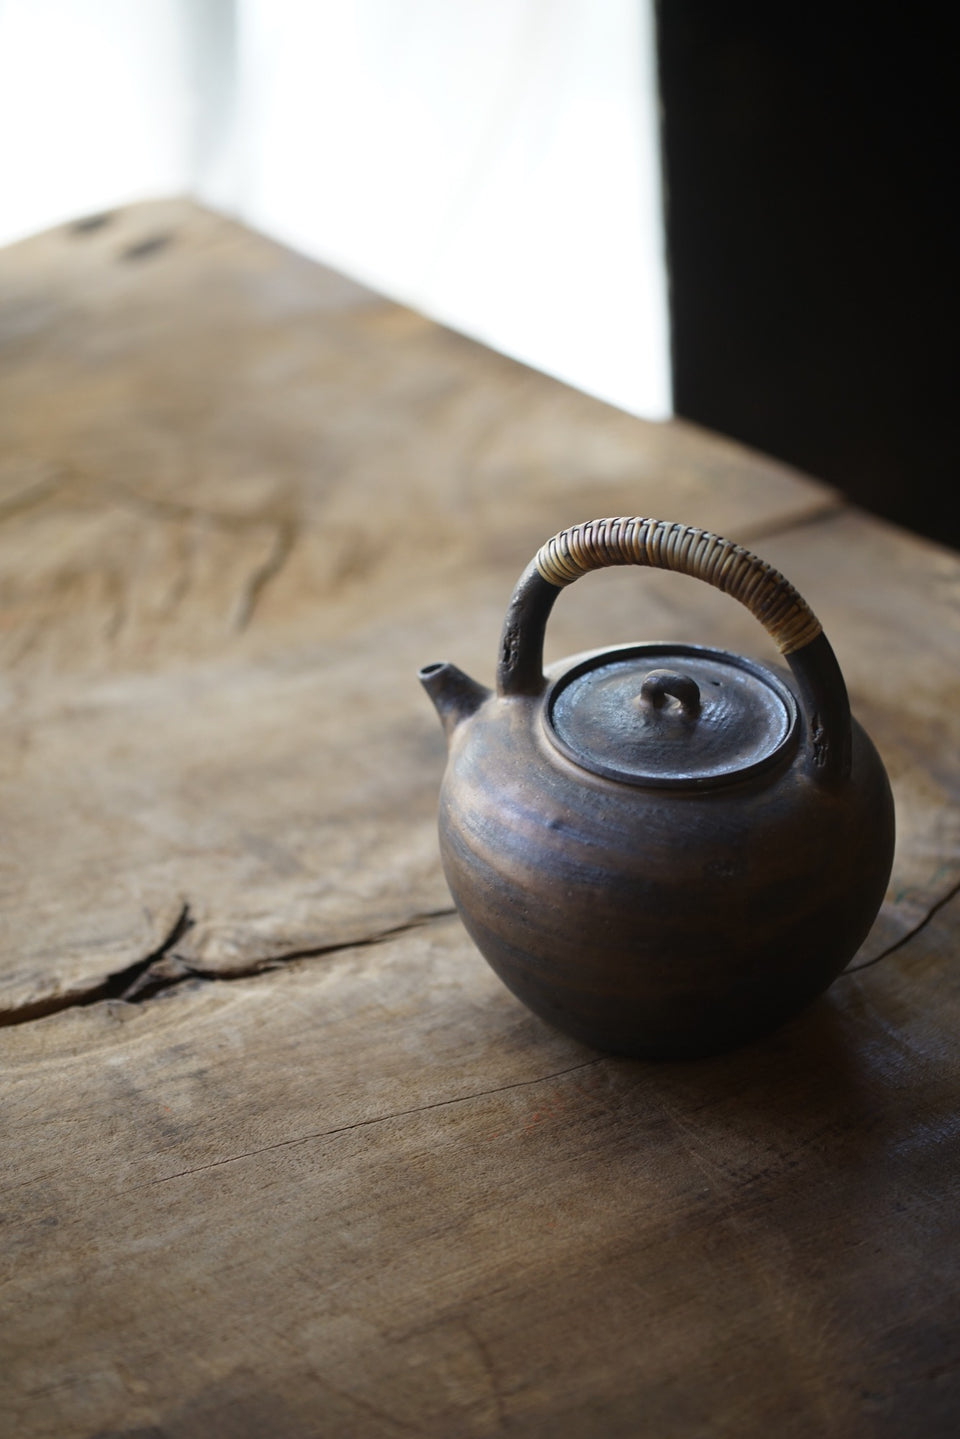 Metal Glazed Ceramic Kettle with Bamboo Skin Handle